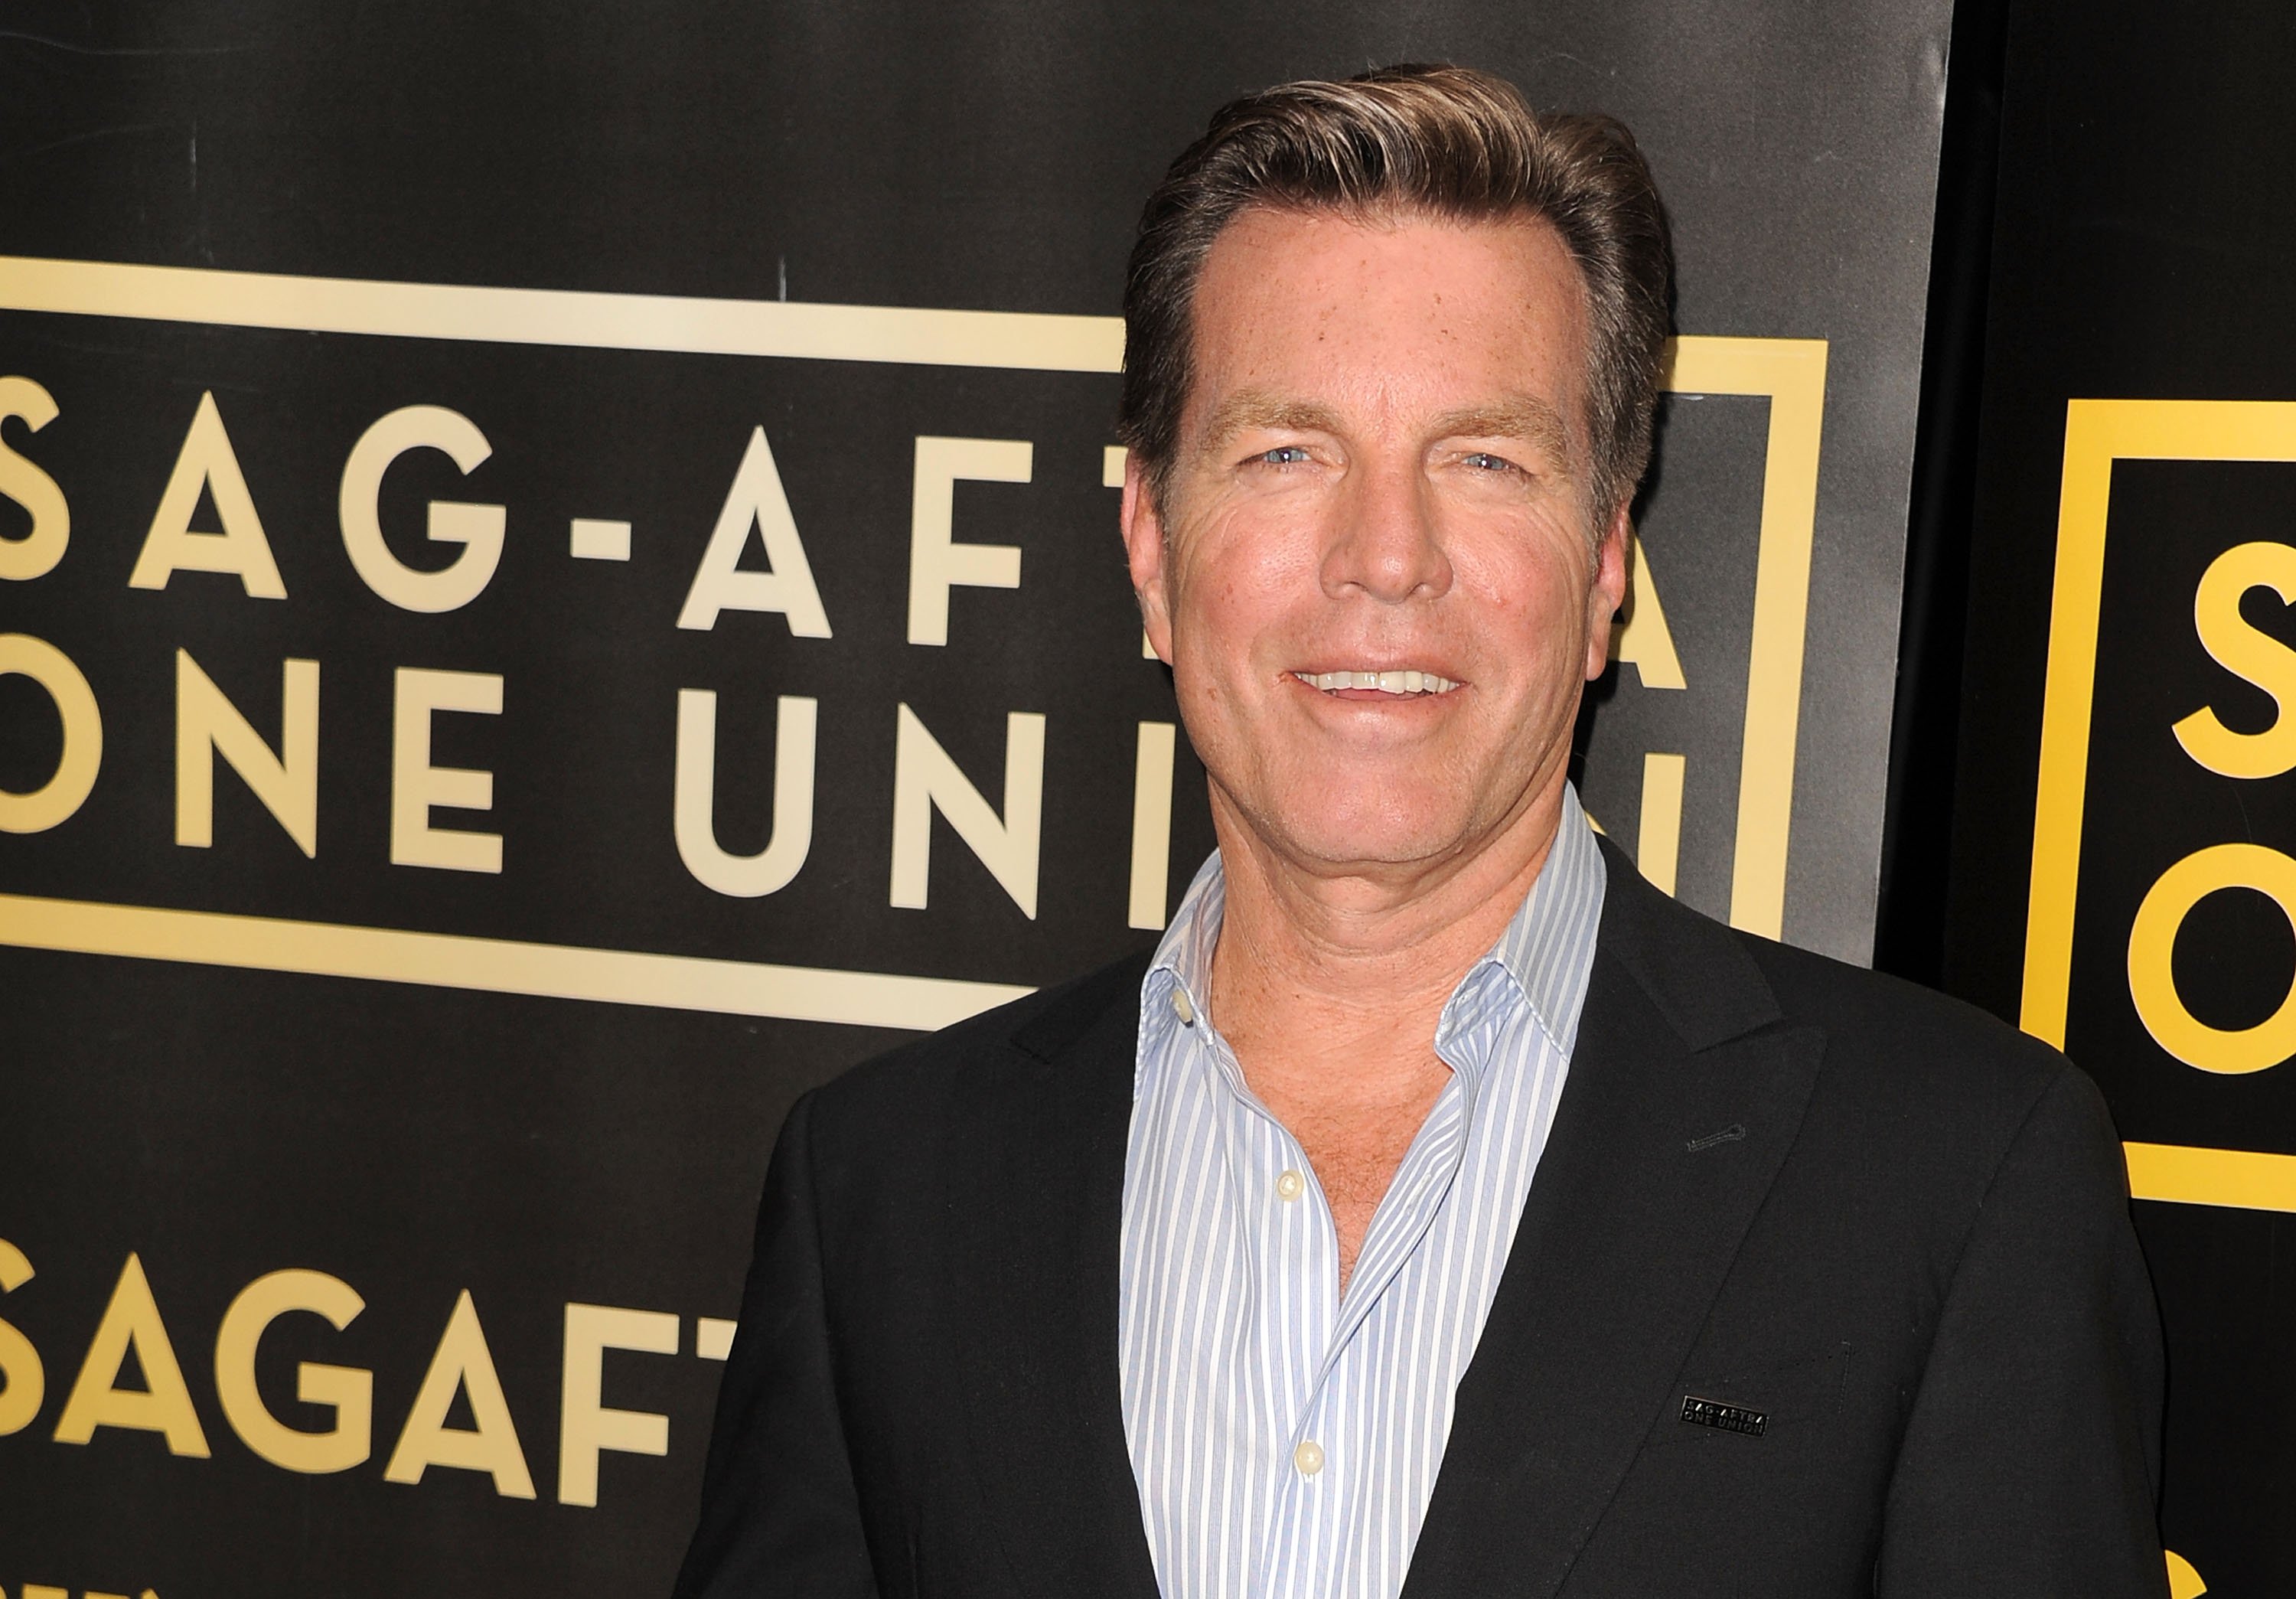 'The Young and the Restless' actor Peter Bergman wearing a black suit and blue and white striped shirt.